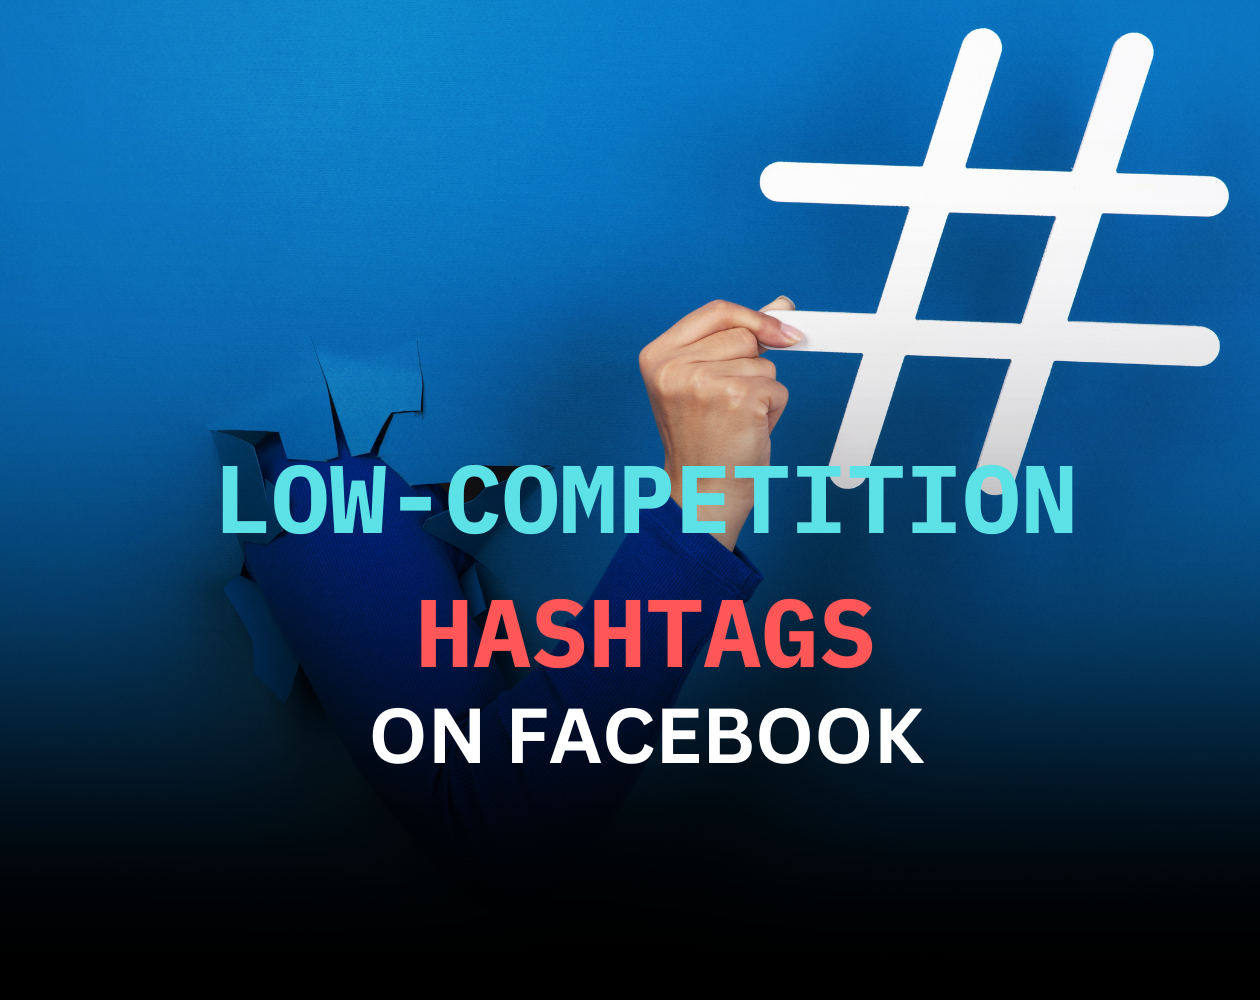 The Ultimate Guide to Discovering Low Competition Hashtags on Facebook   Learn how to effectively identify and leverage low-competition hashtags on Facebook. This guide covers key competitor research tactics, Facebook's built-in tools, long-tail variation